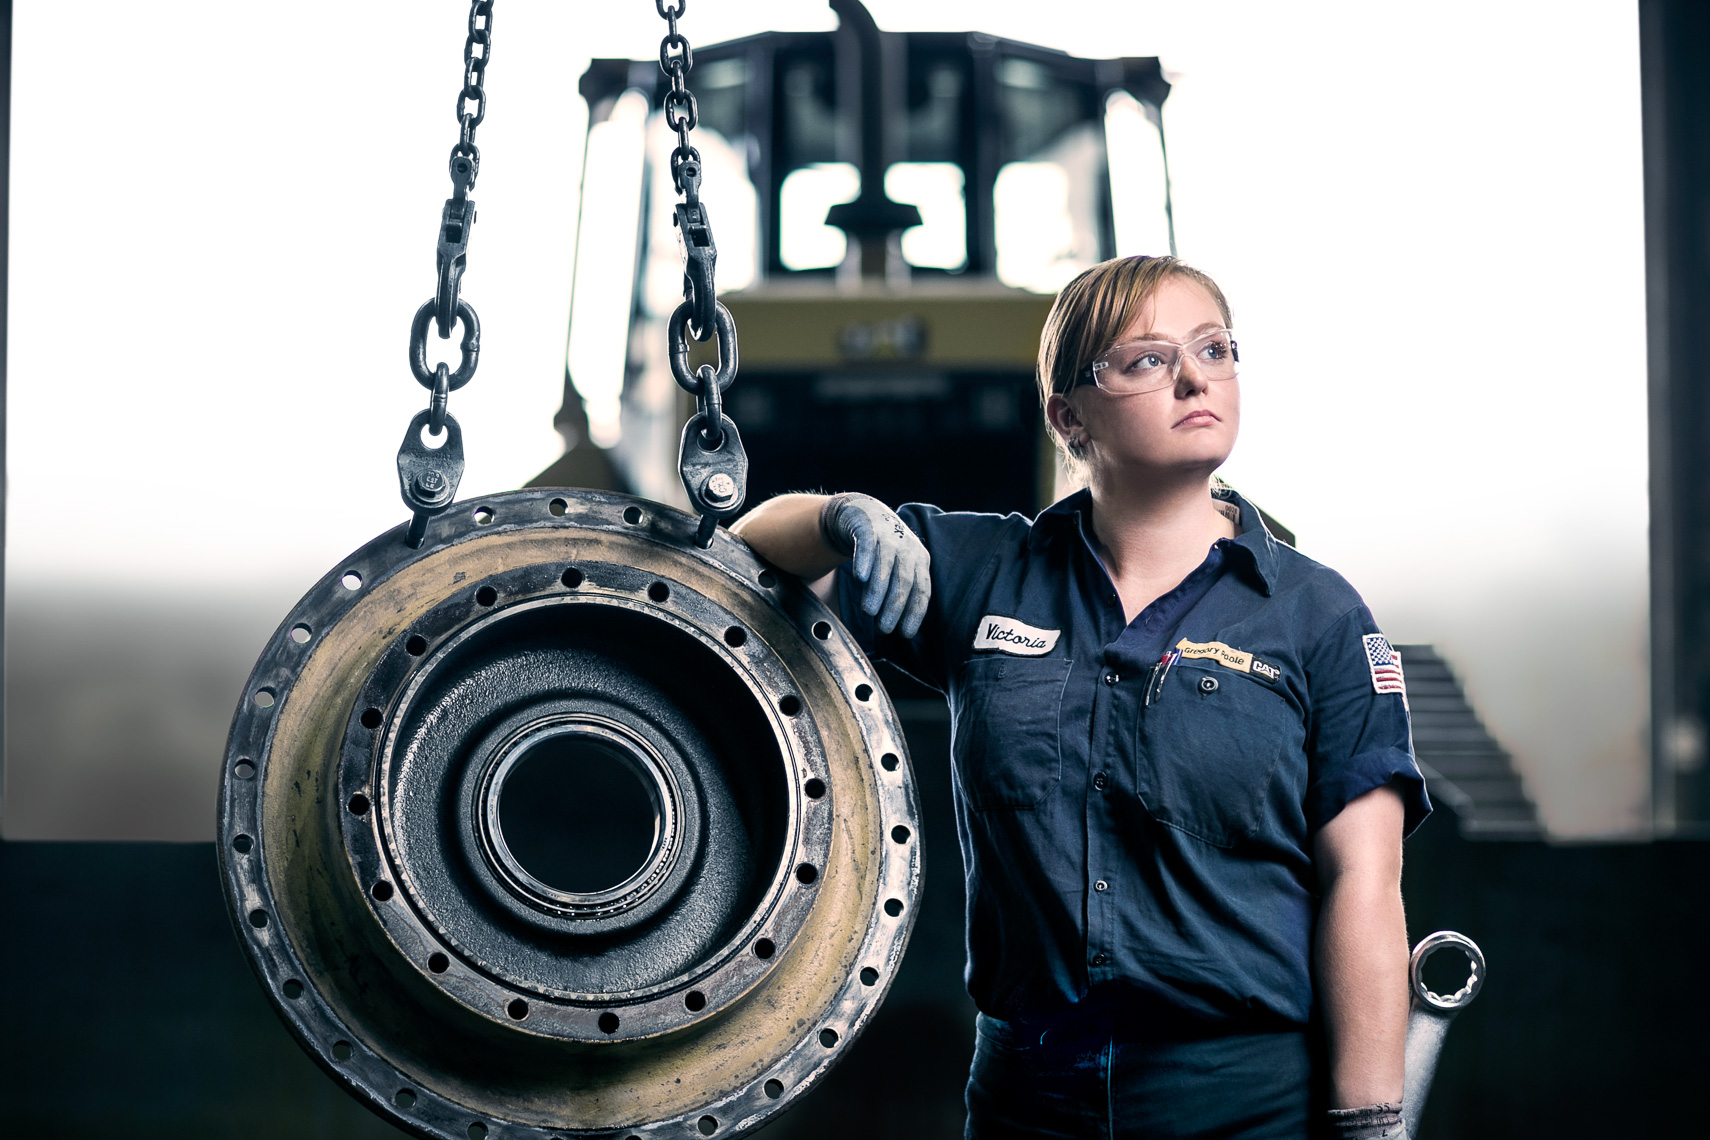 Service_Technicians_for_Gregory_Poole_20190904_photo_by_Justin_Kase_Conder_3161_Retouched_V01_CAT.JPG